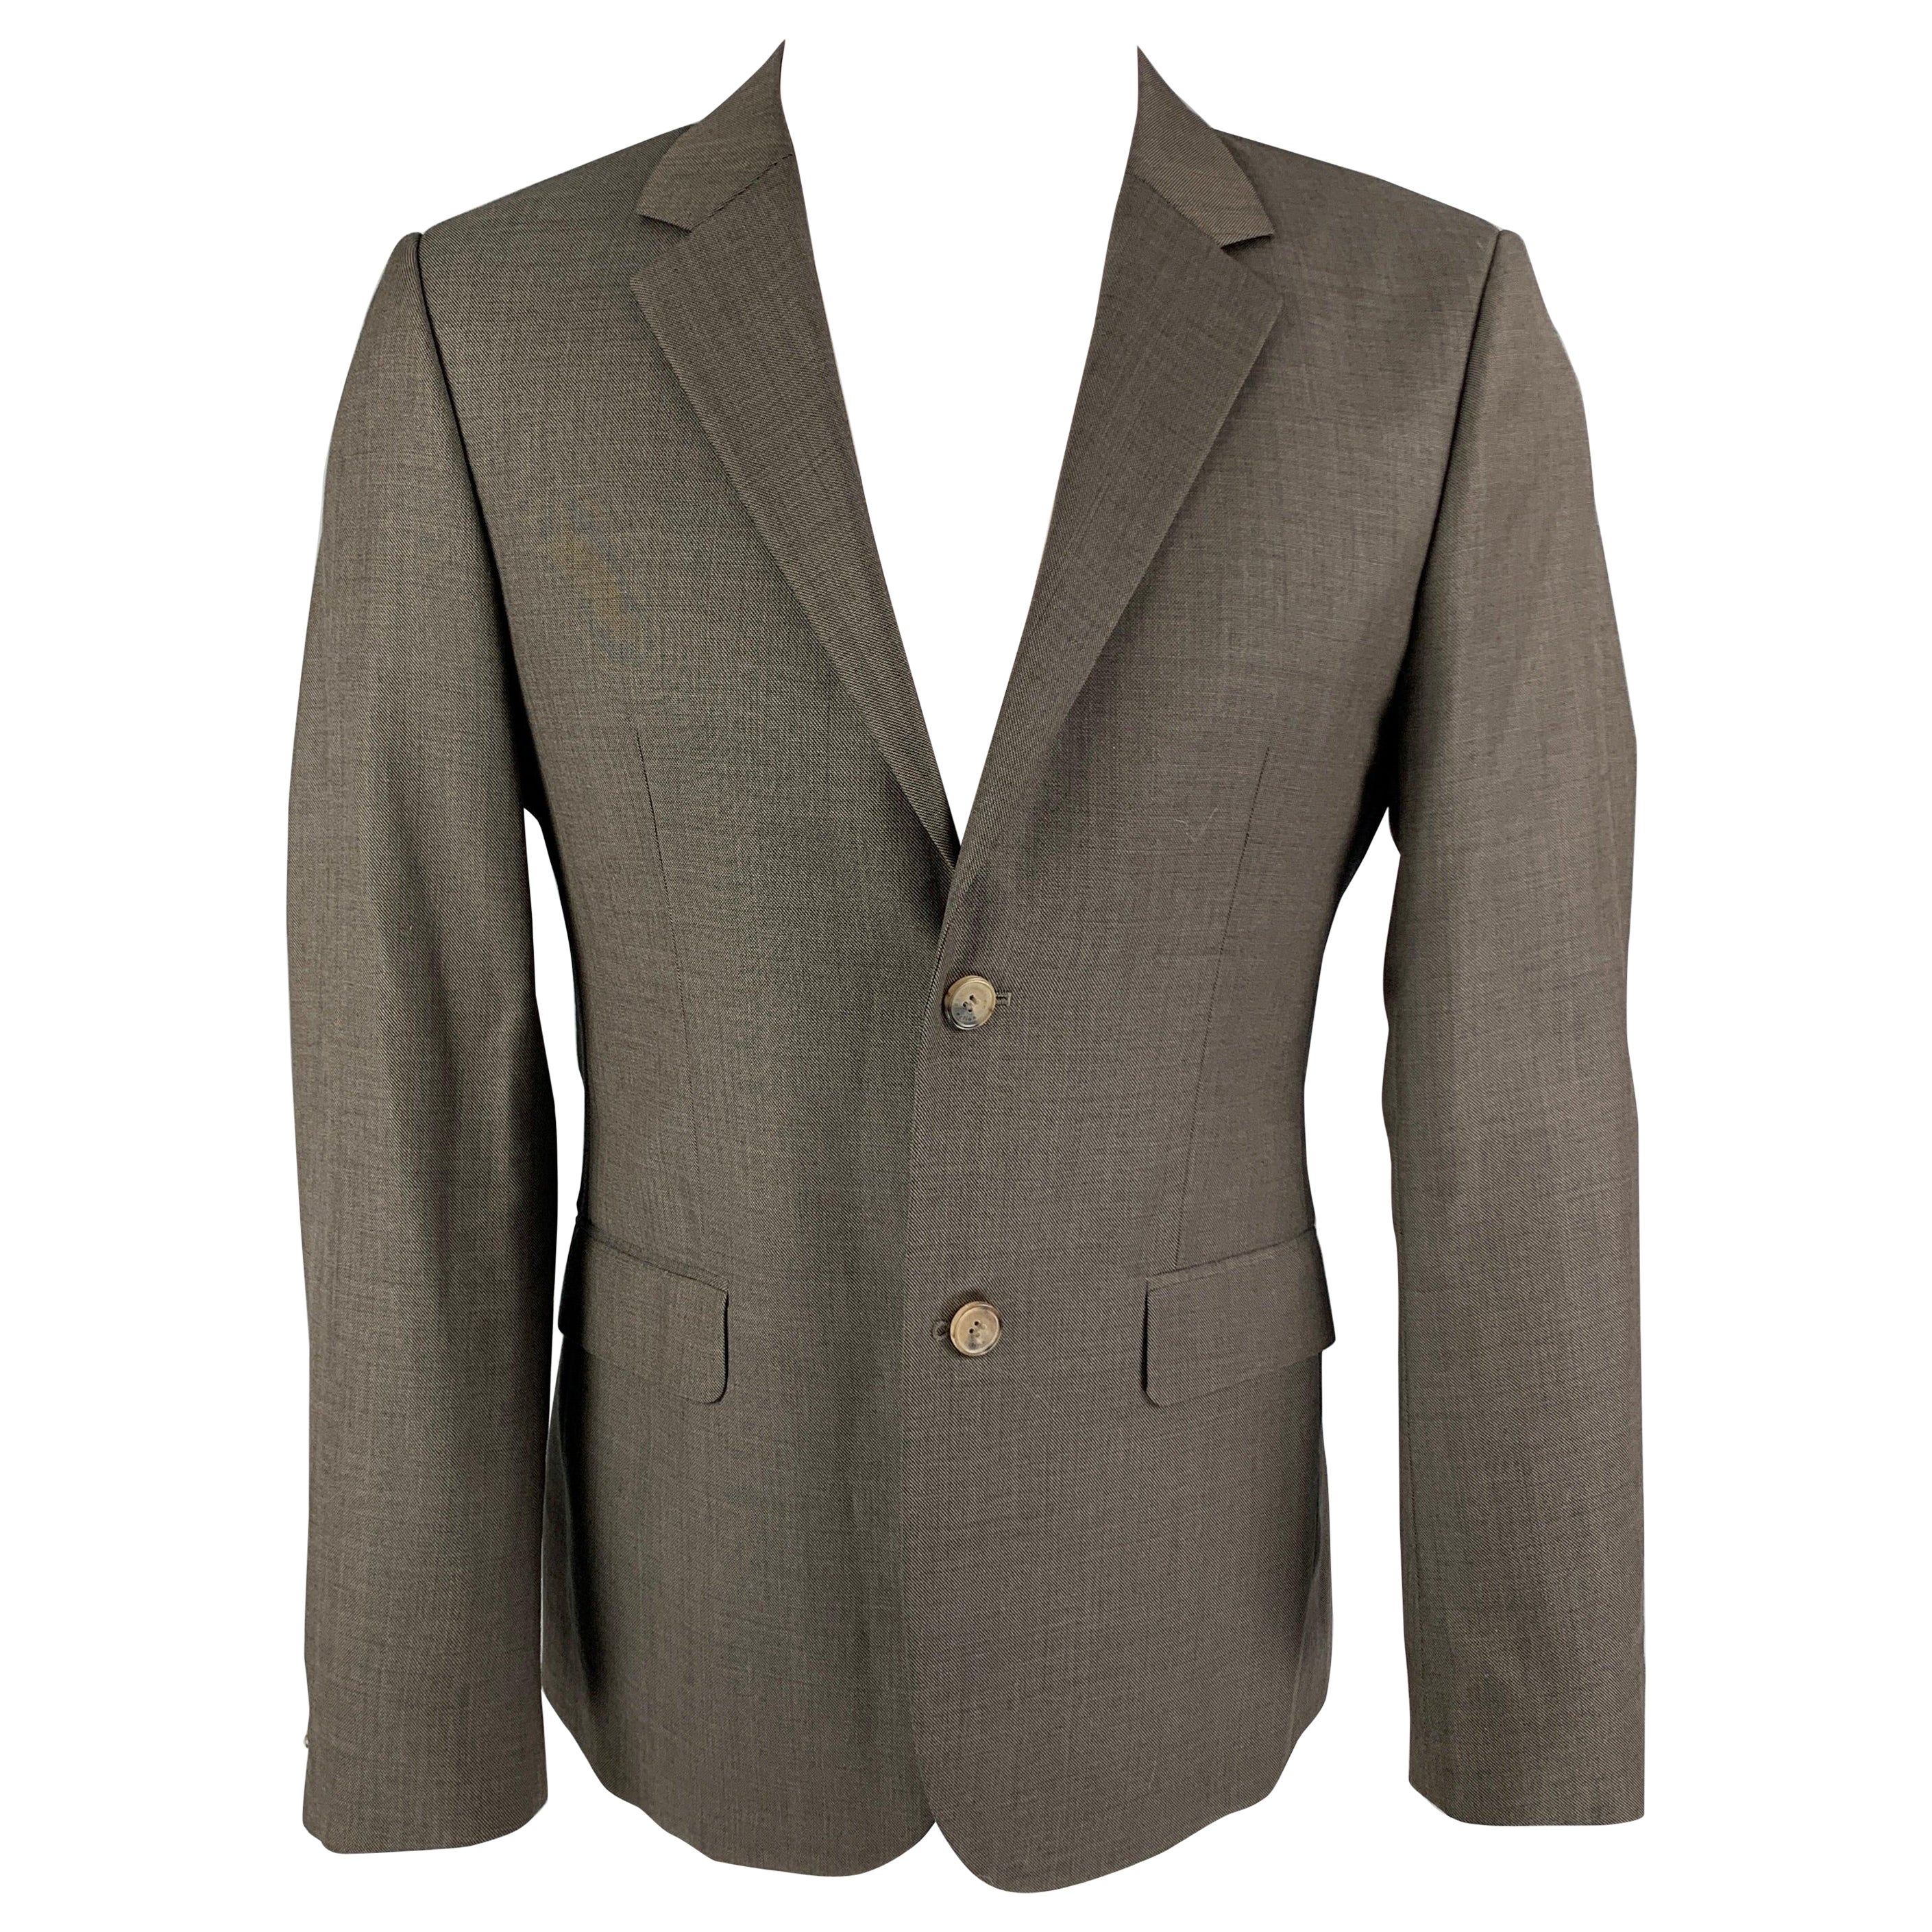 CALVIN KLEIN COLLECTION Size 36 Grey Wool Notch Lapel Sport Coat For Sale